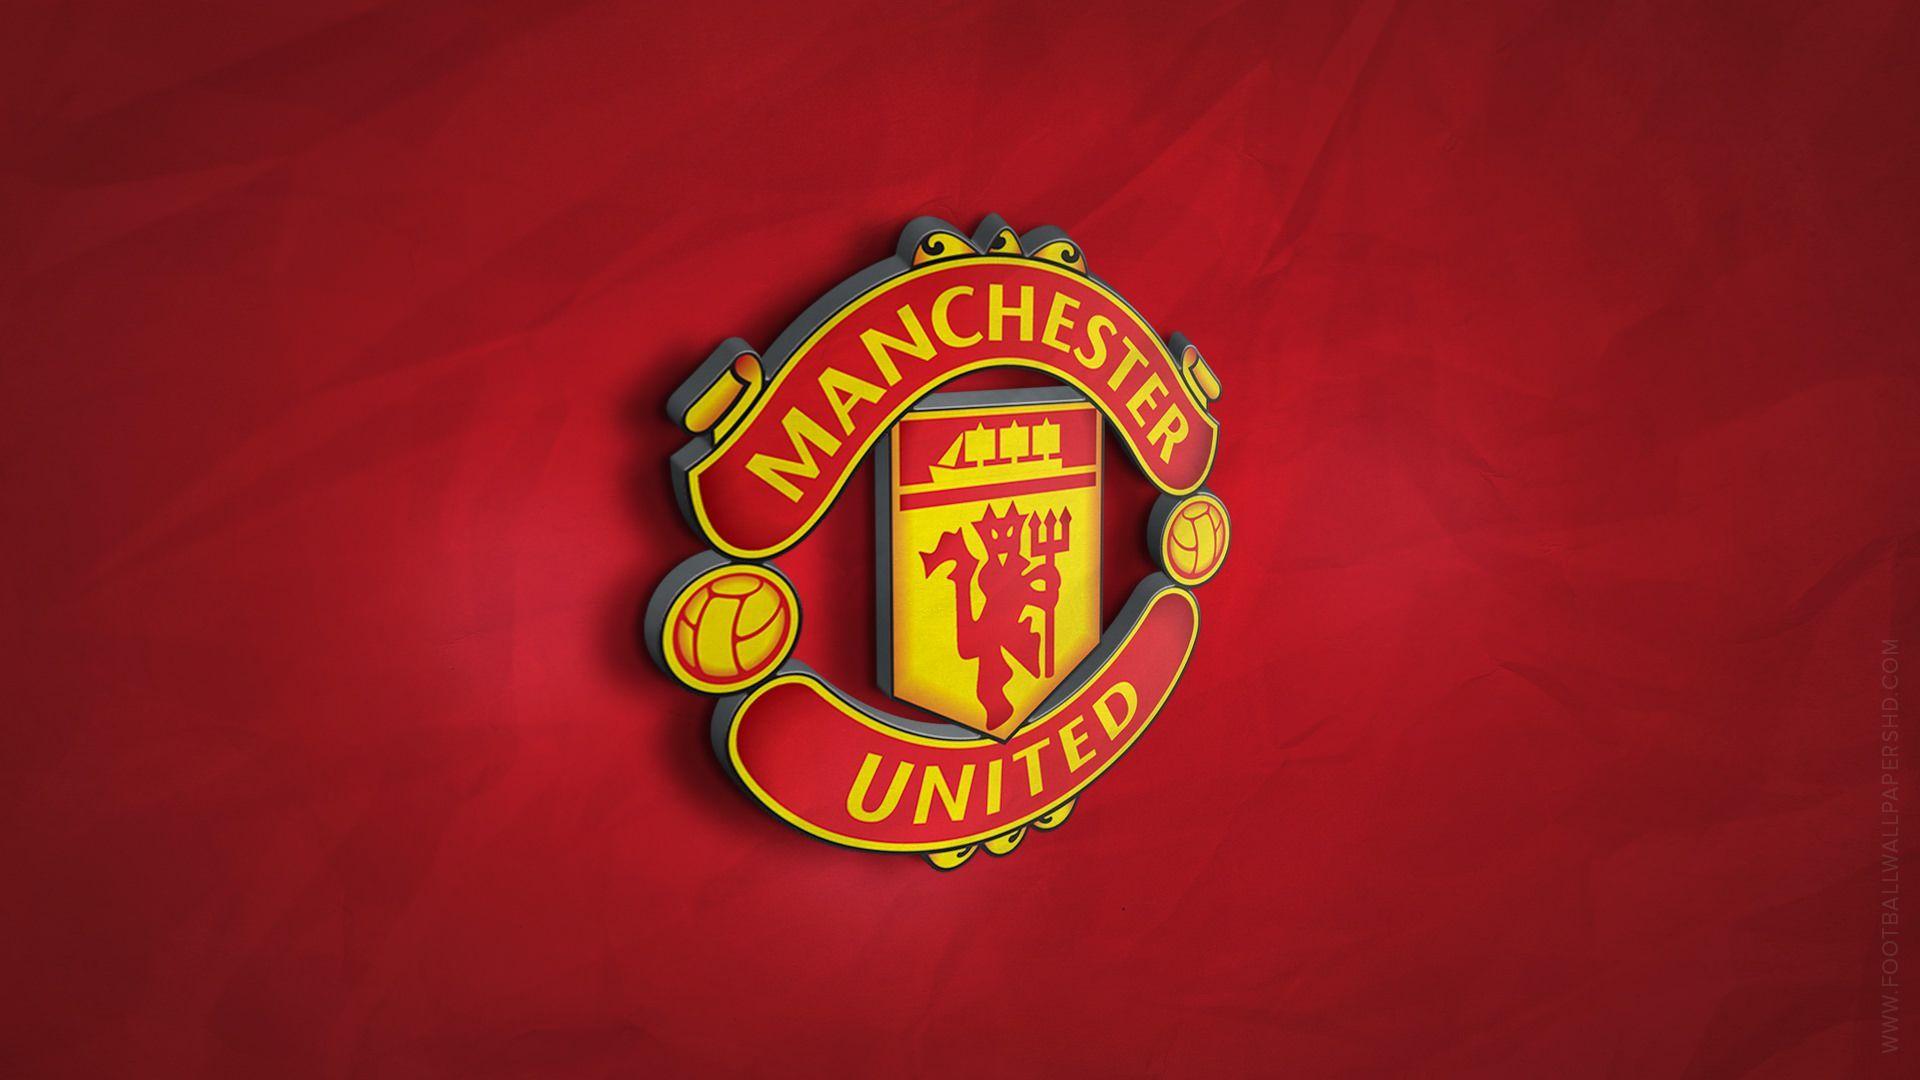 manchester united images free download